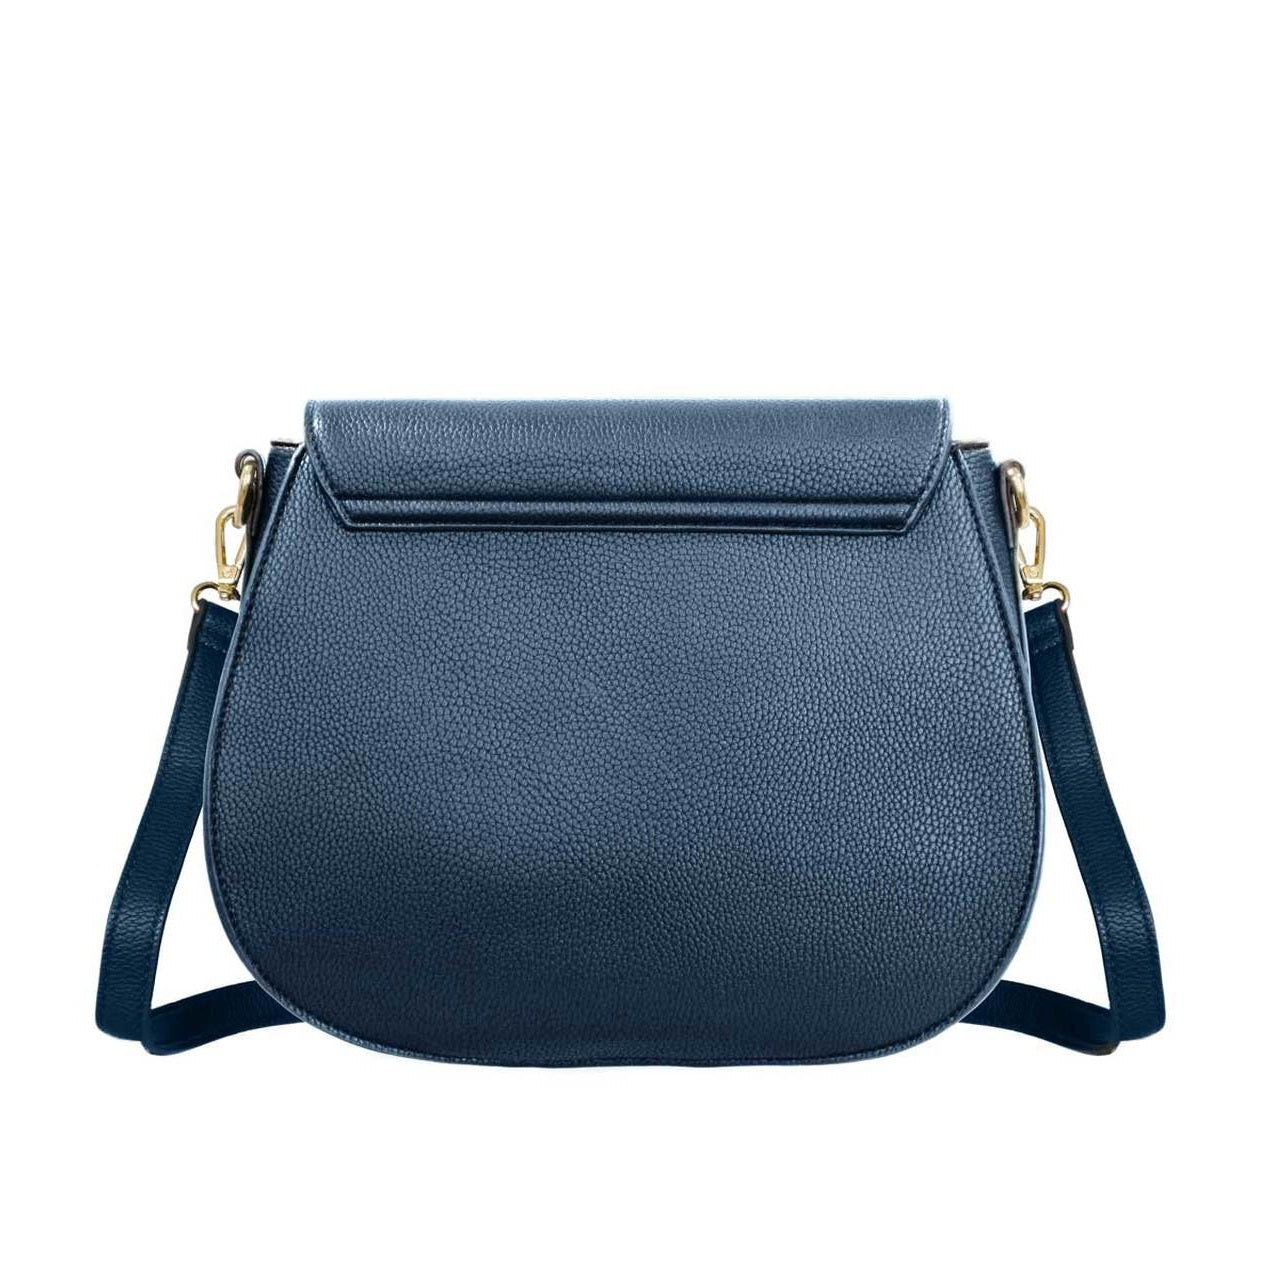 Tipperary Crystal Savoy Large Satchel Bag Navy  This stylish new addition to our bag collection is proving to be very popular, with an outside zip compartment the Savoy bag is stylish and functional. 